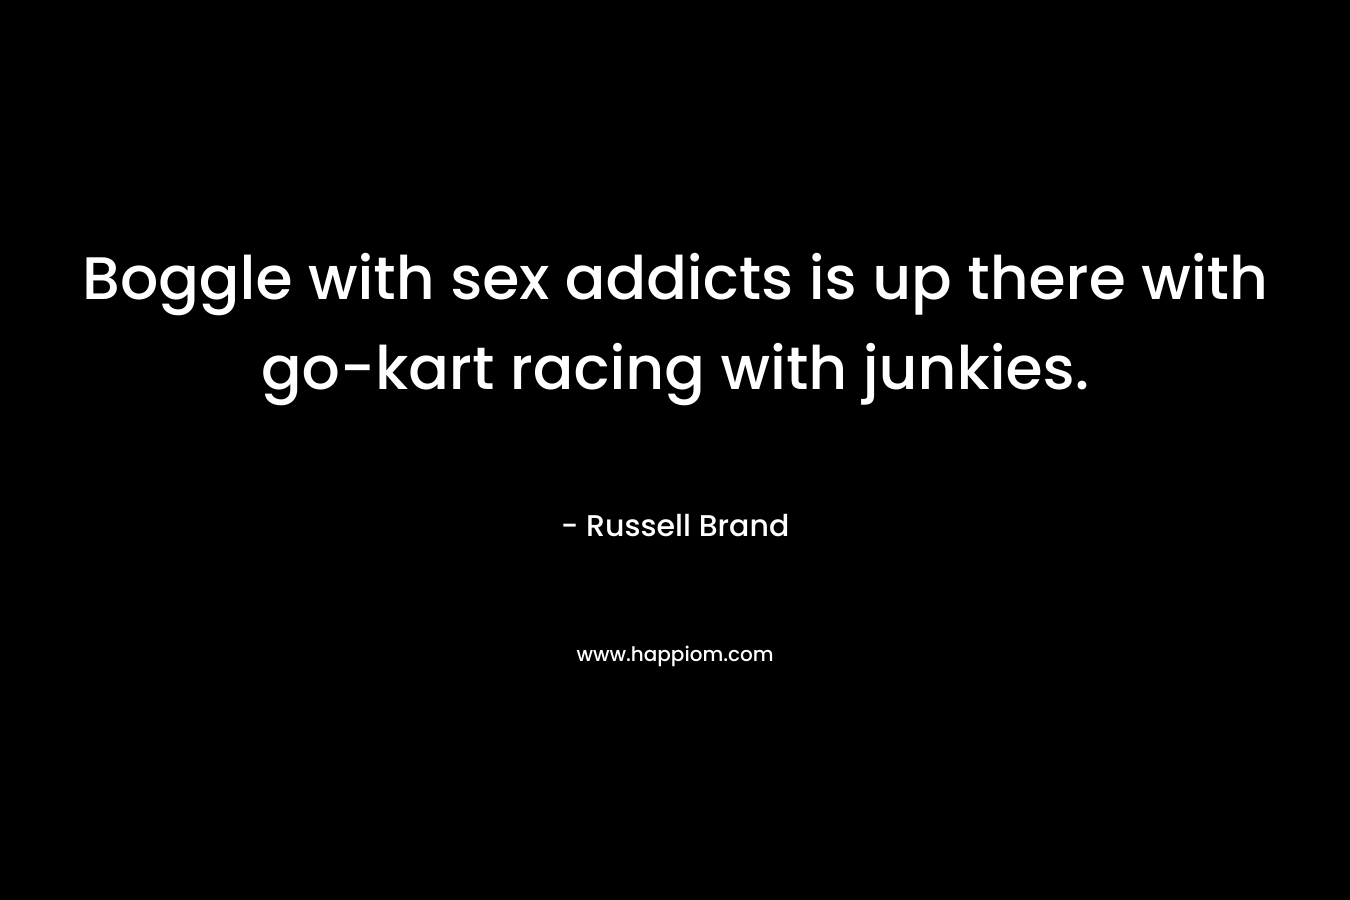 Boggle with sex addicts is up there with go-kart racing with junkies. – Russell Brand